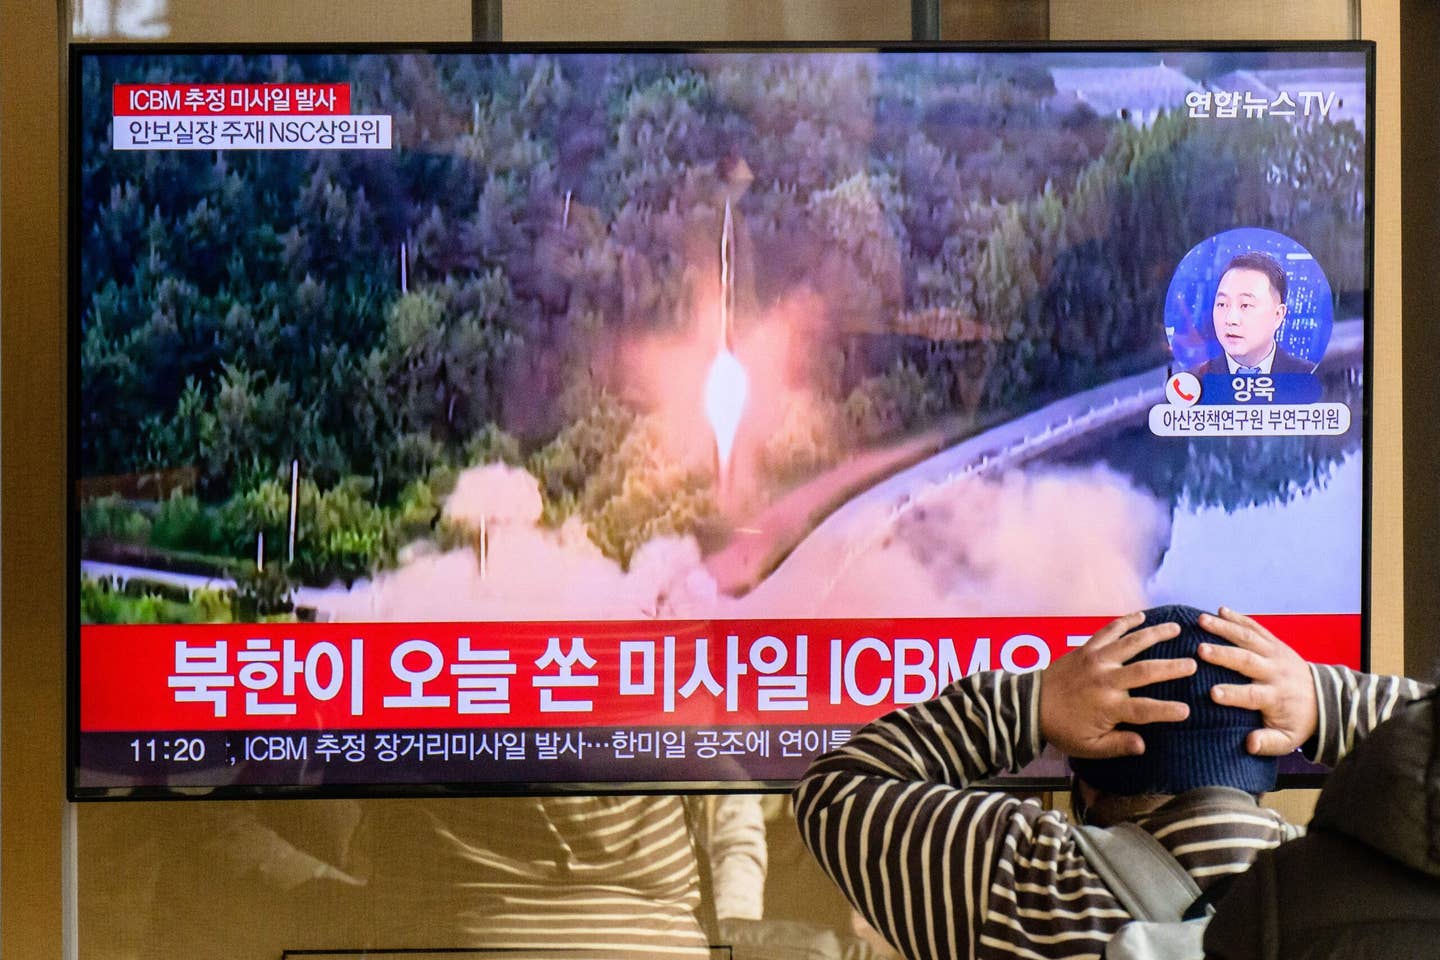 A man watches a television showing a news broadcast with file footage of a North Korean missile test, at a railway station in Seoul on November 18, 2022. <em>Credit: ANTHONY WALLACE/AFP via Getty Images</em>